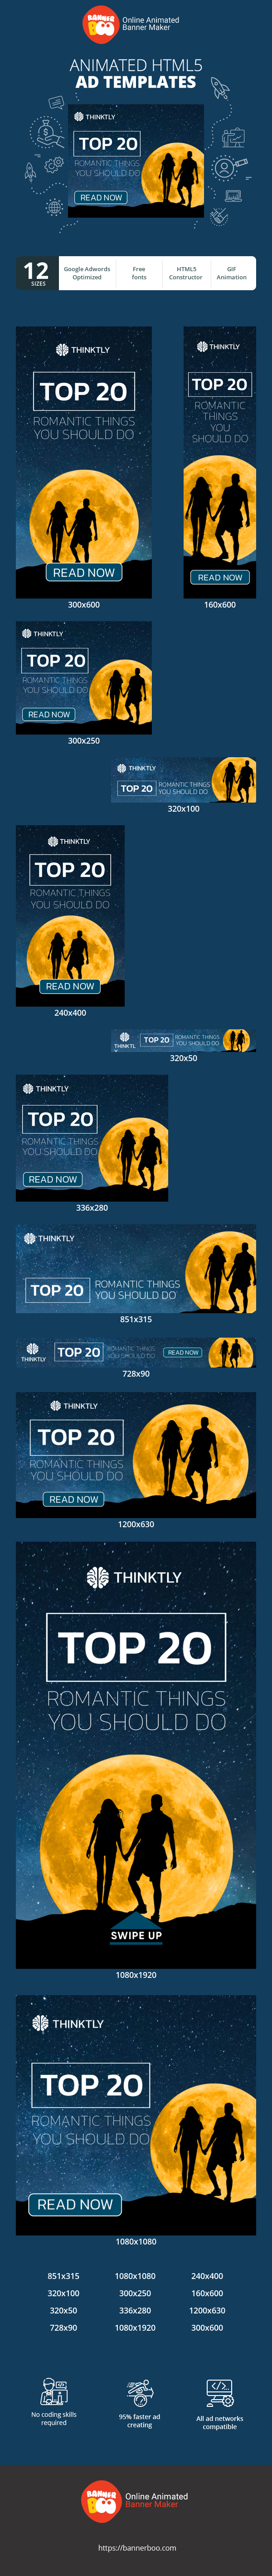 Banner ad template — Top 20 Romantic Things You Should Do — Lifestyle Blog